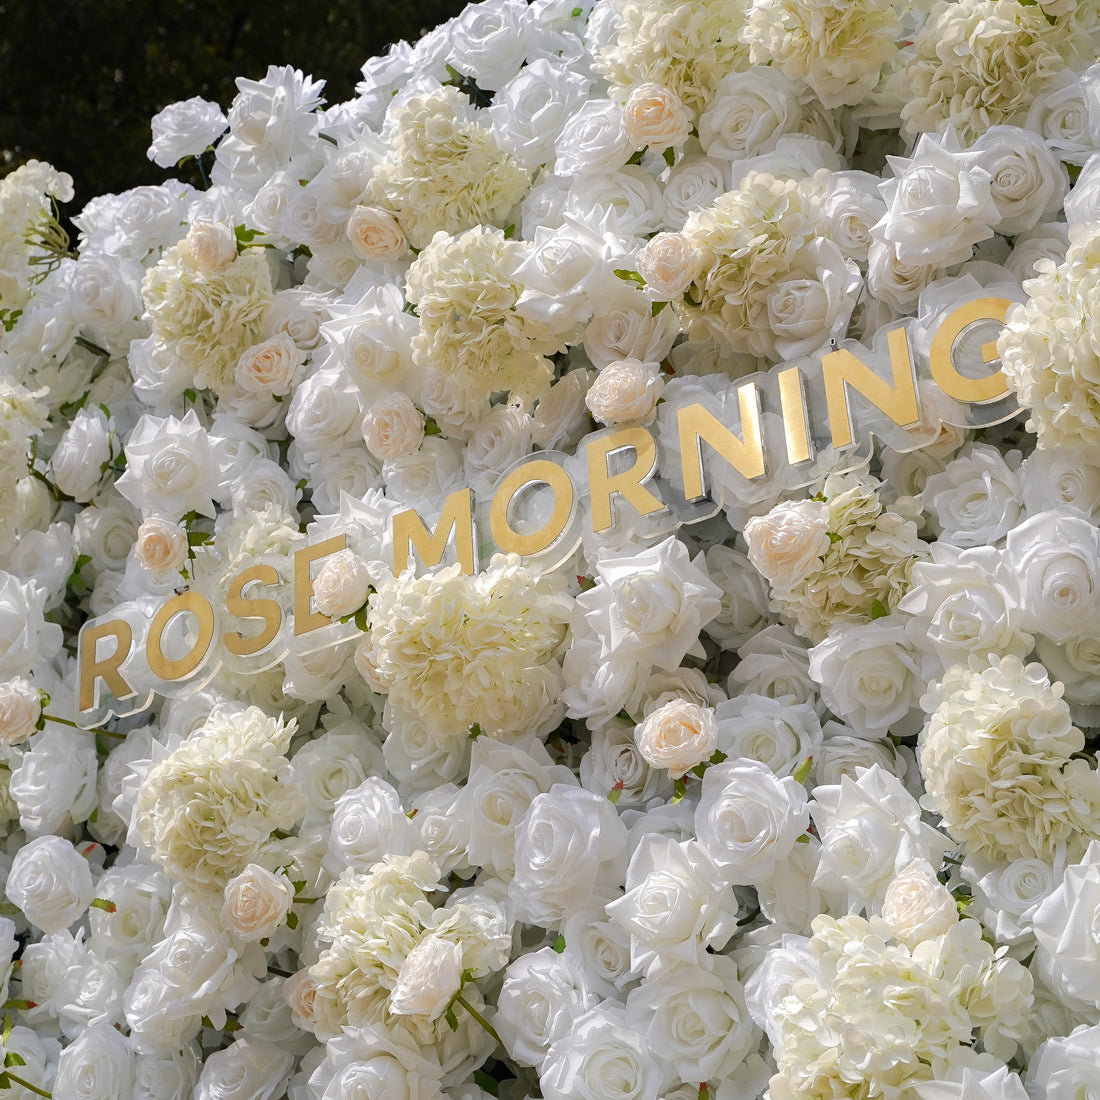 Ziling：Rose Morning Zipper flower wall Fabric Backdrop Artificial rolling up curtain flower wall Rose Morning